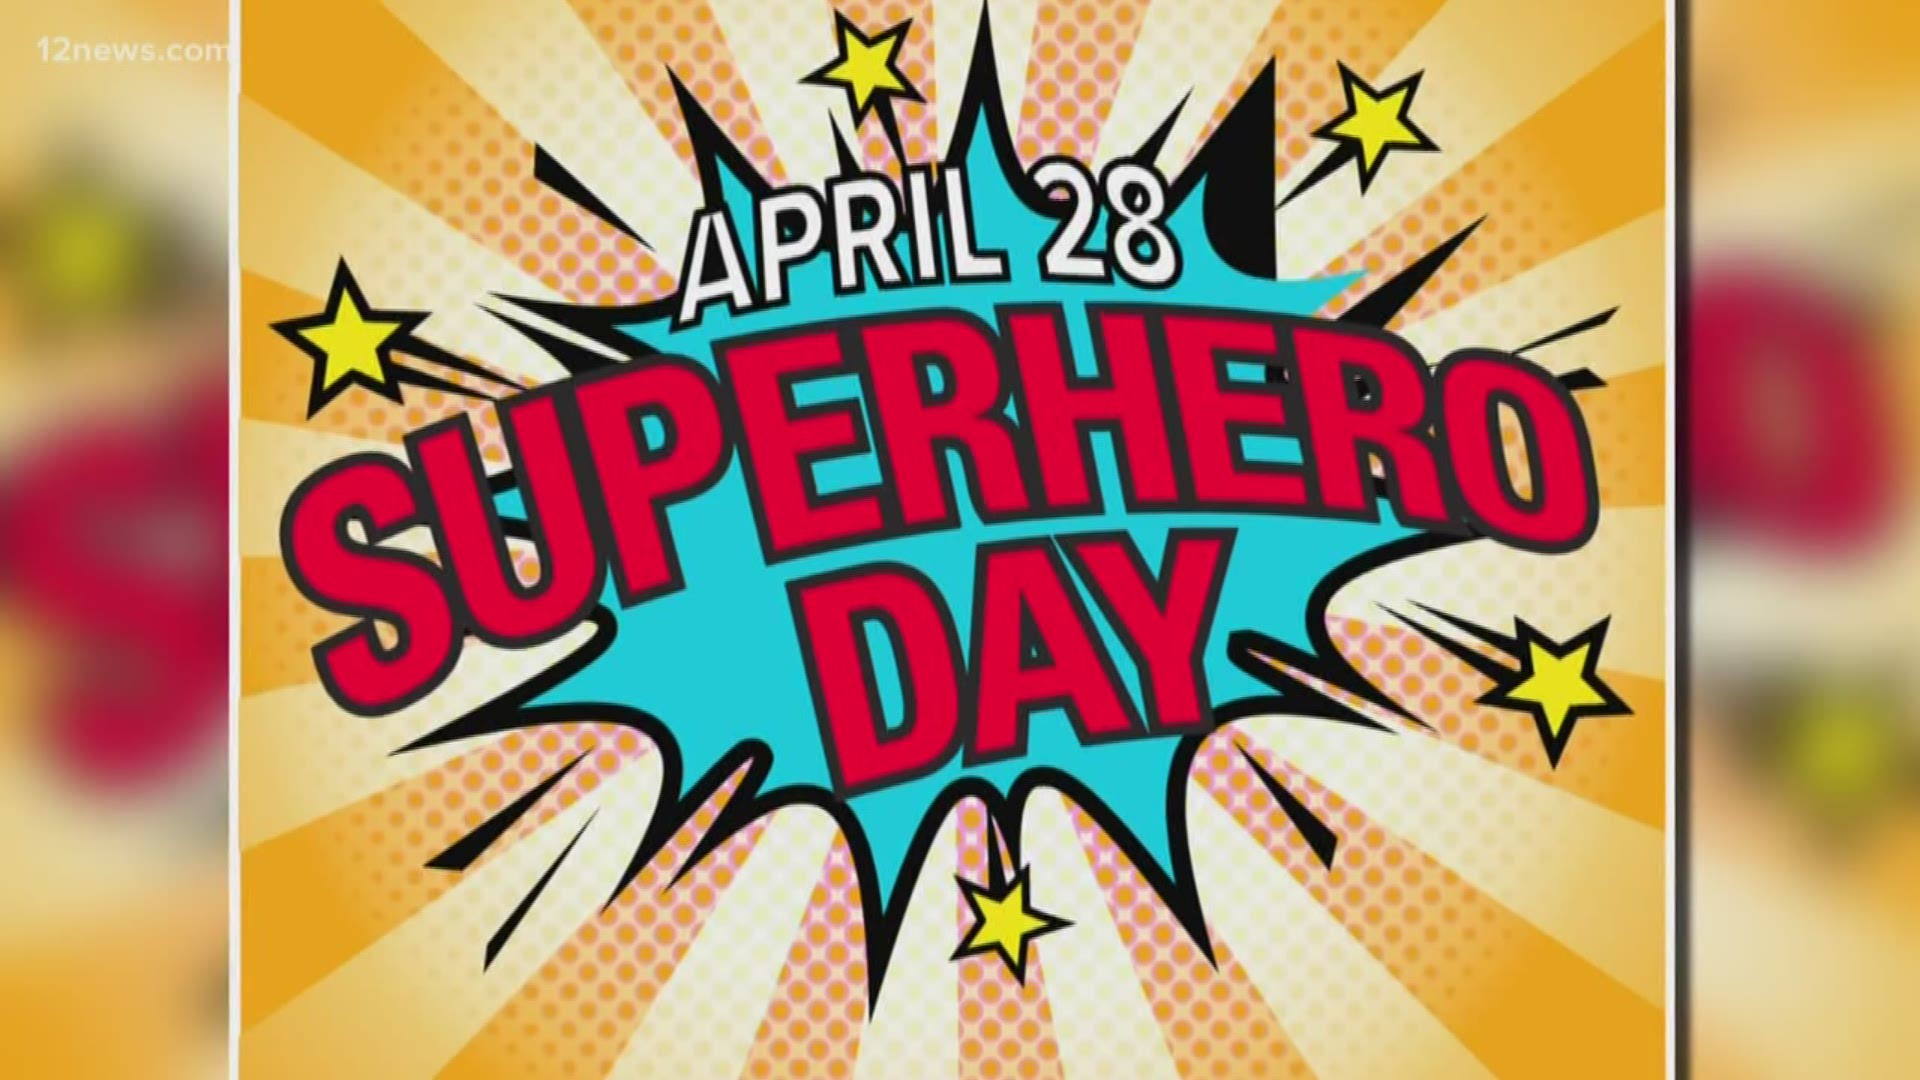 Valley heroes honored on National Superheroes Day